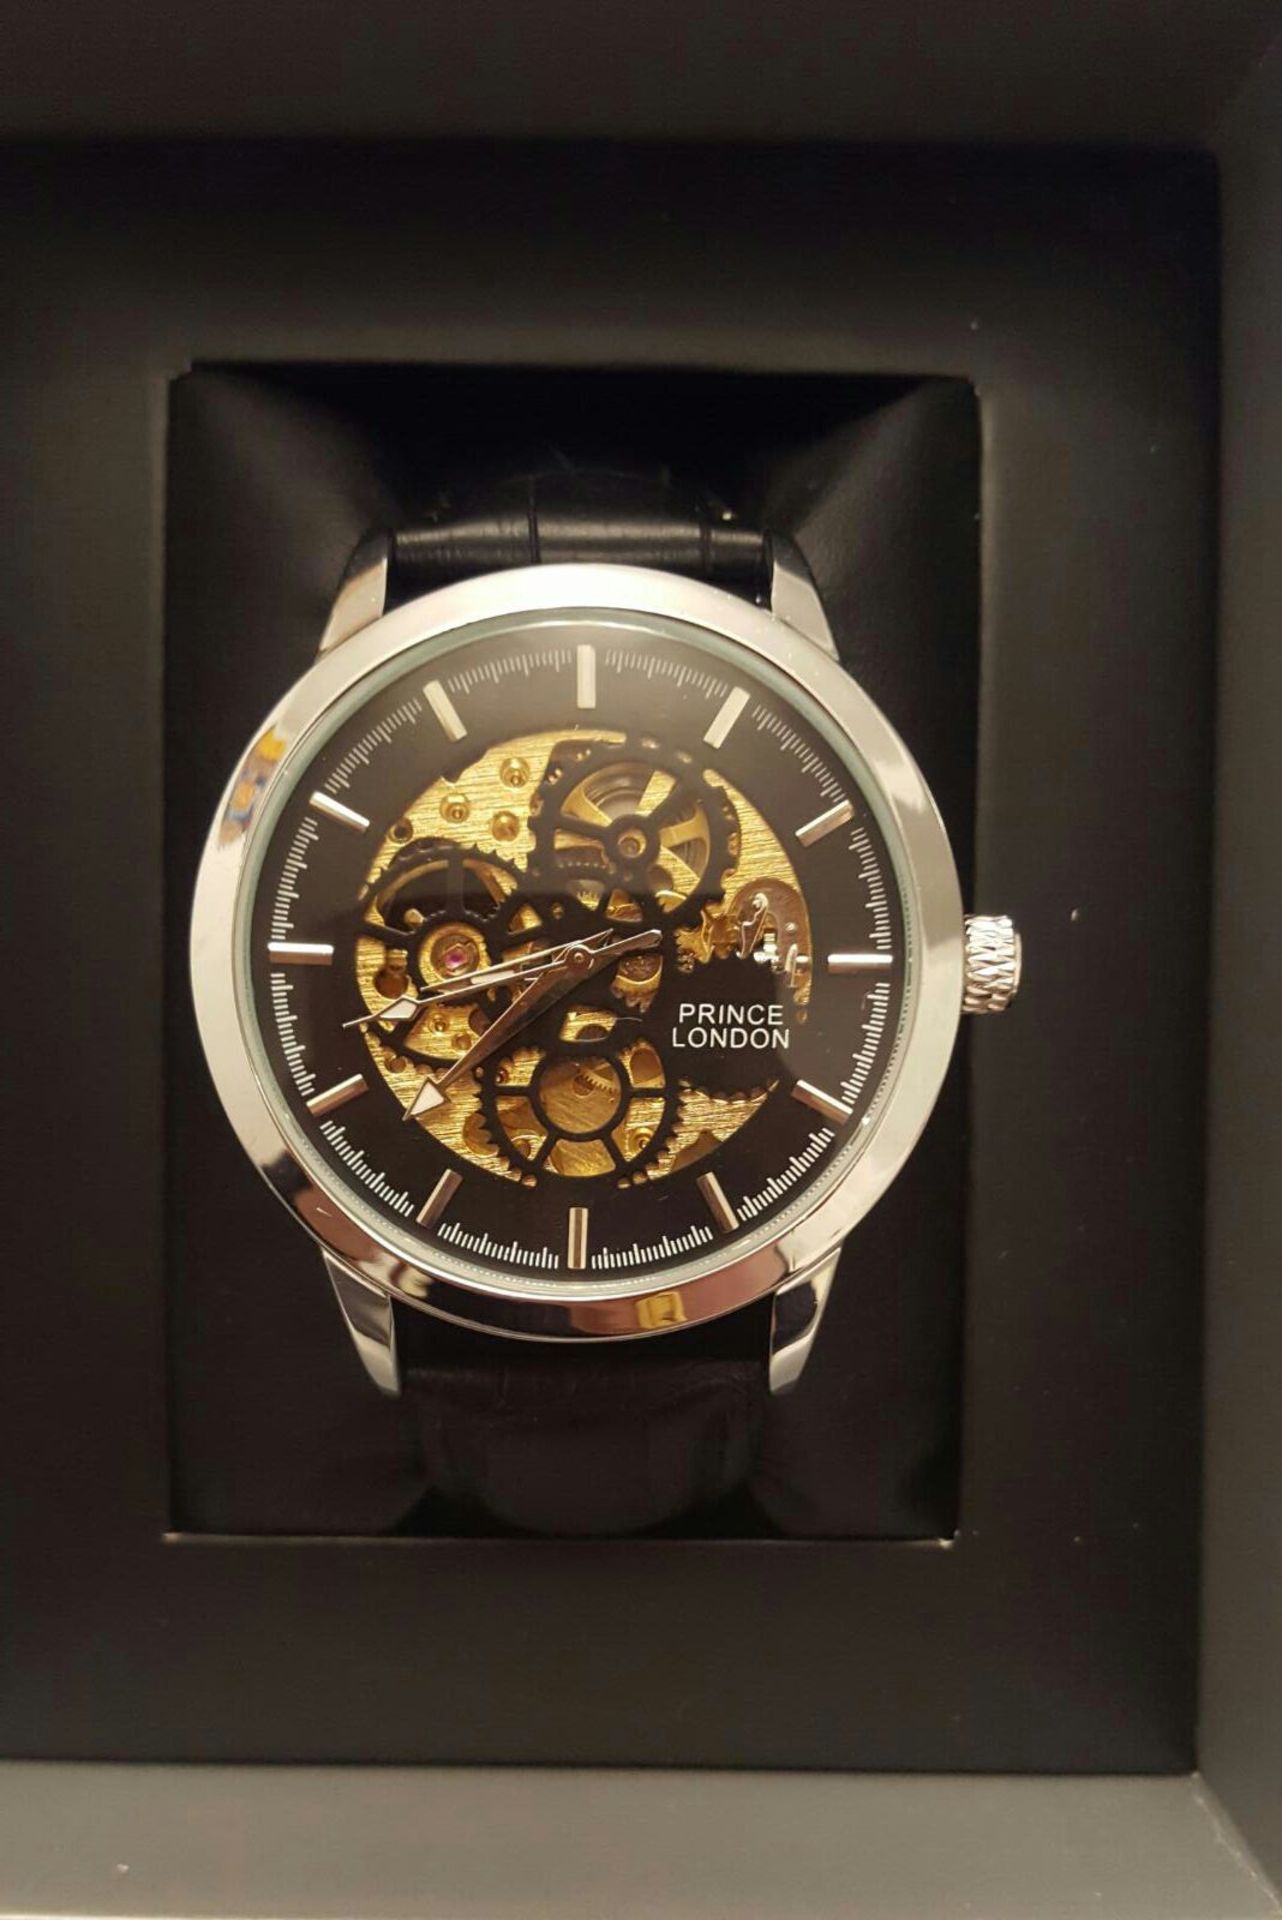 BRAND NEW PRINCE LONDON GENTS AUTOMATIC SKELETON WATCH, SILVER WITH BLACK FACE AND BLACK LEATHER